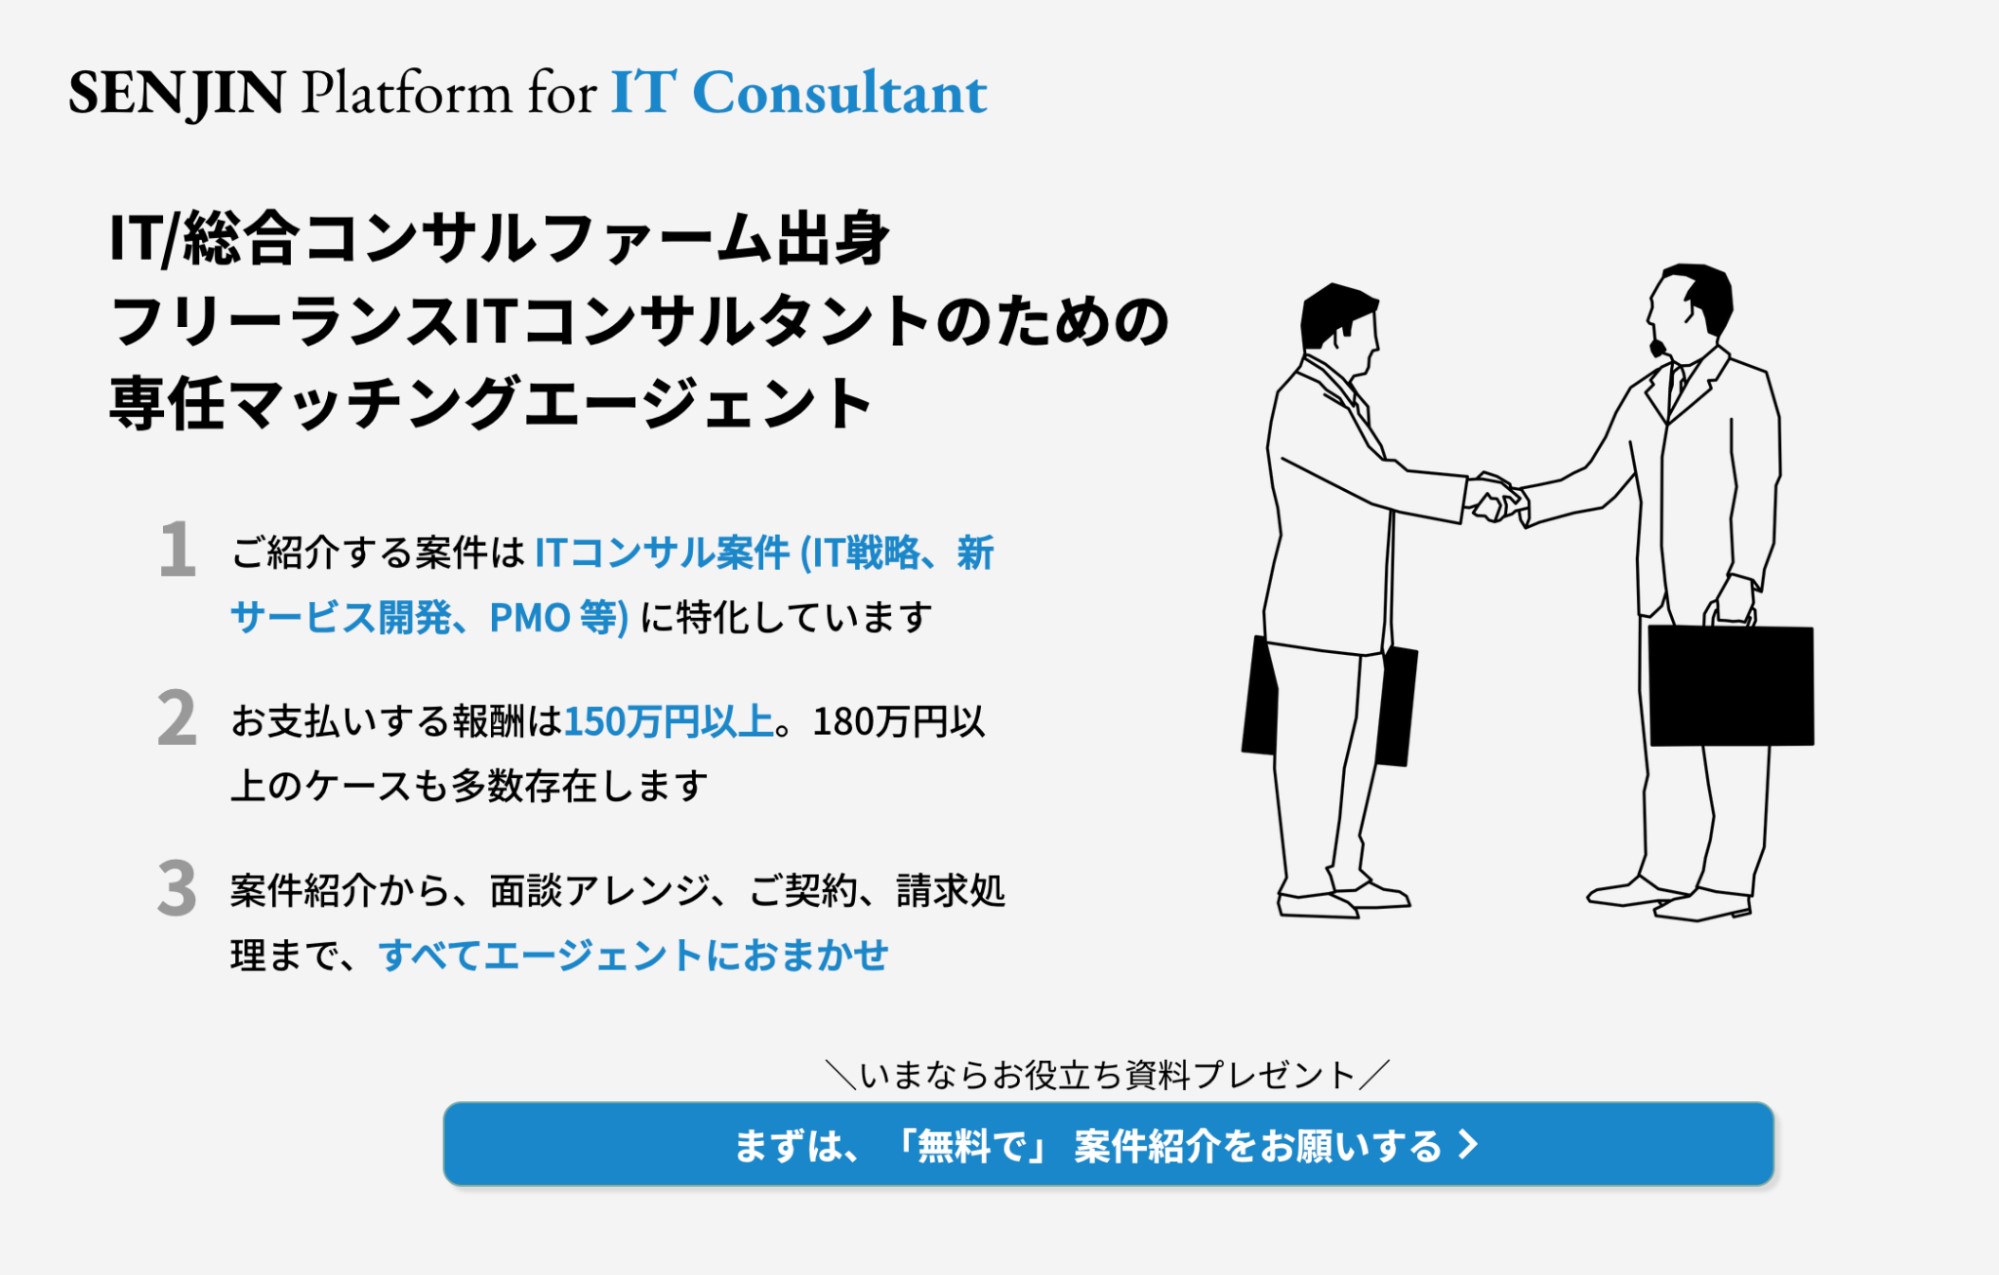 ITSENJIN Platform for IT Consultant